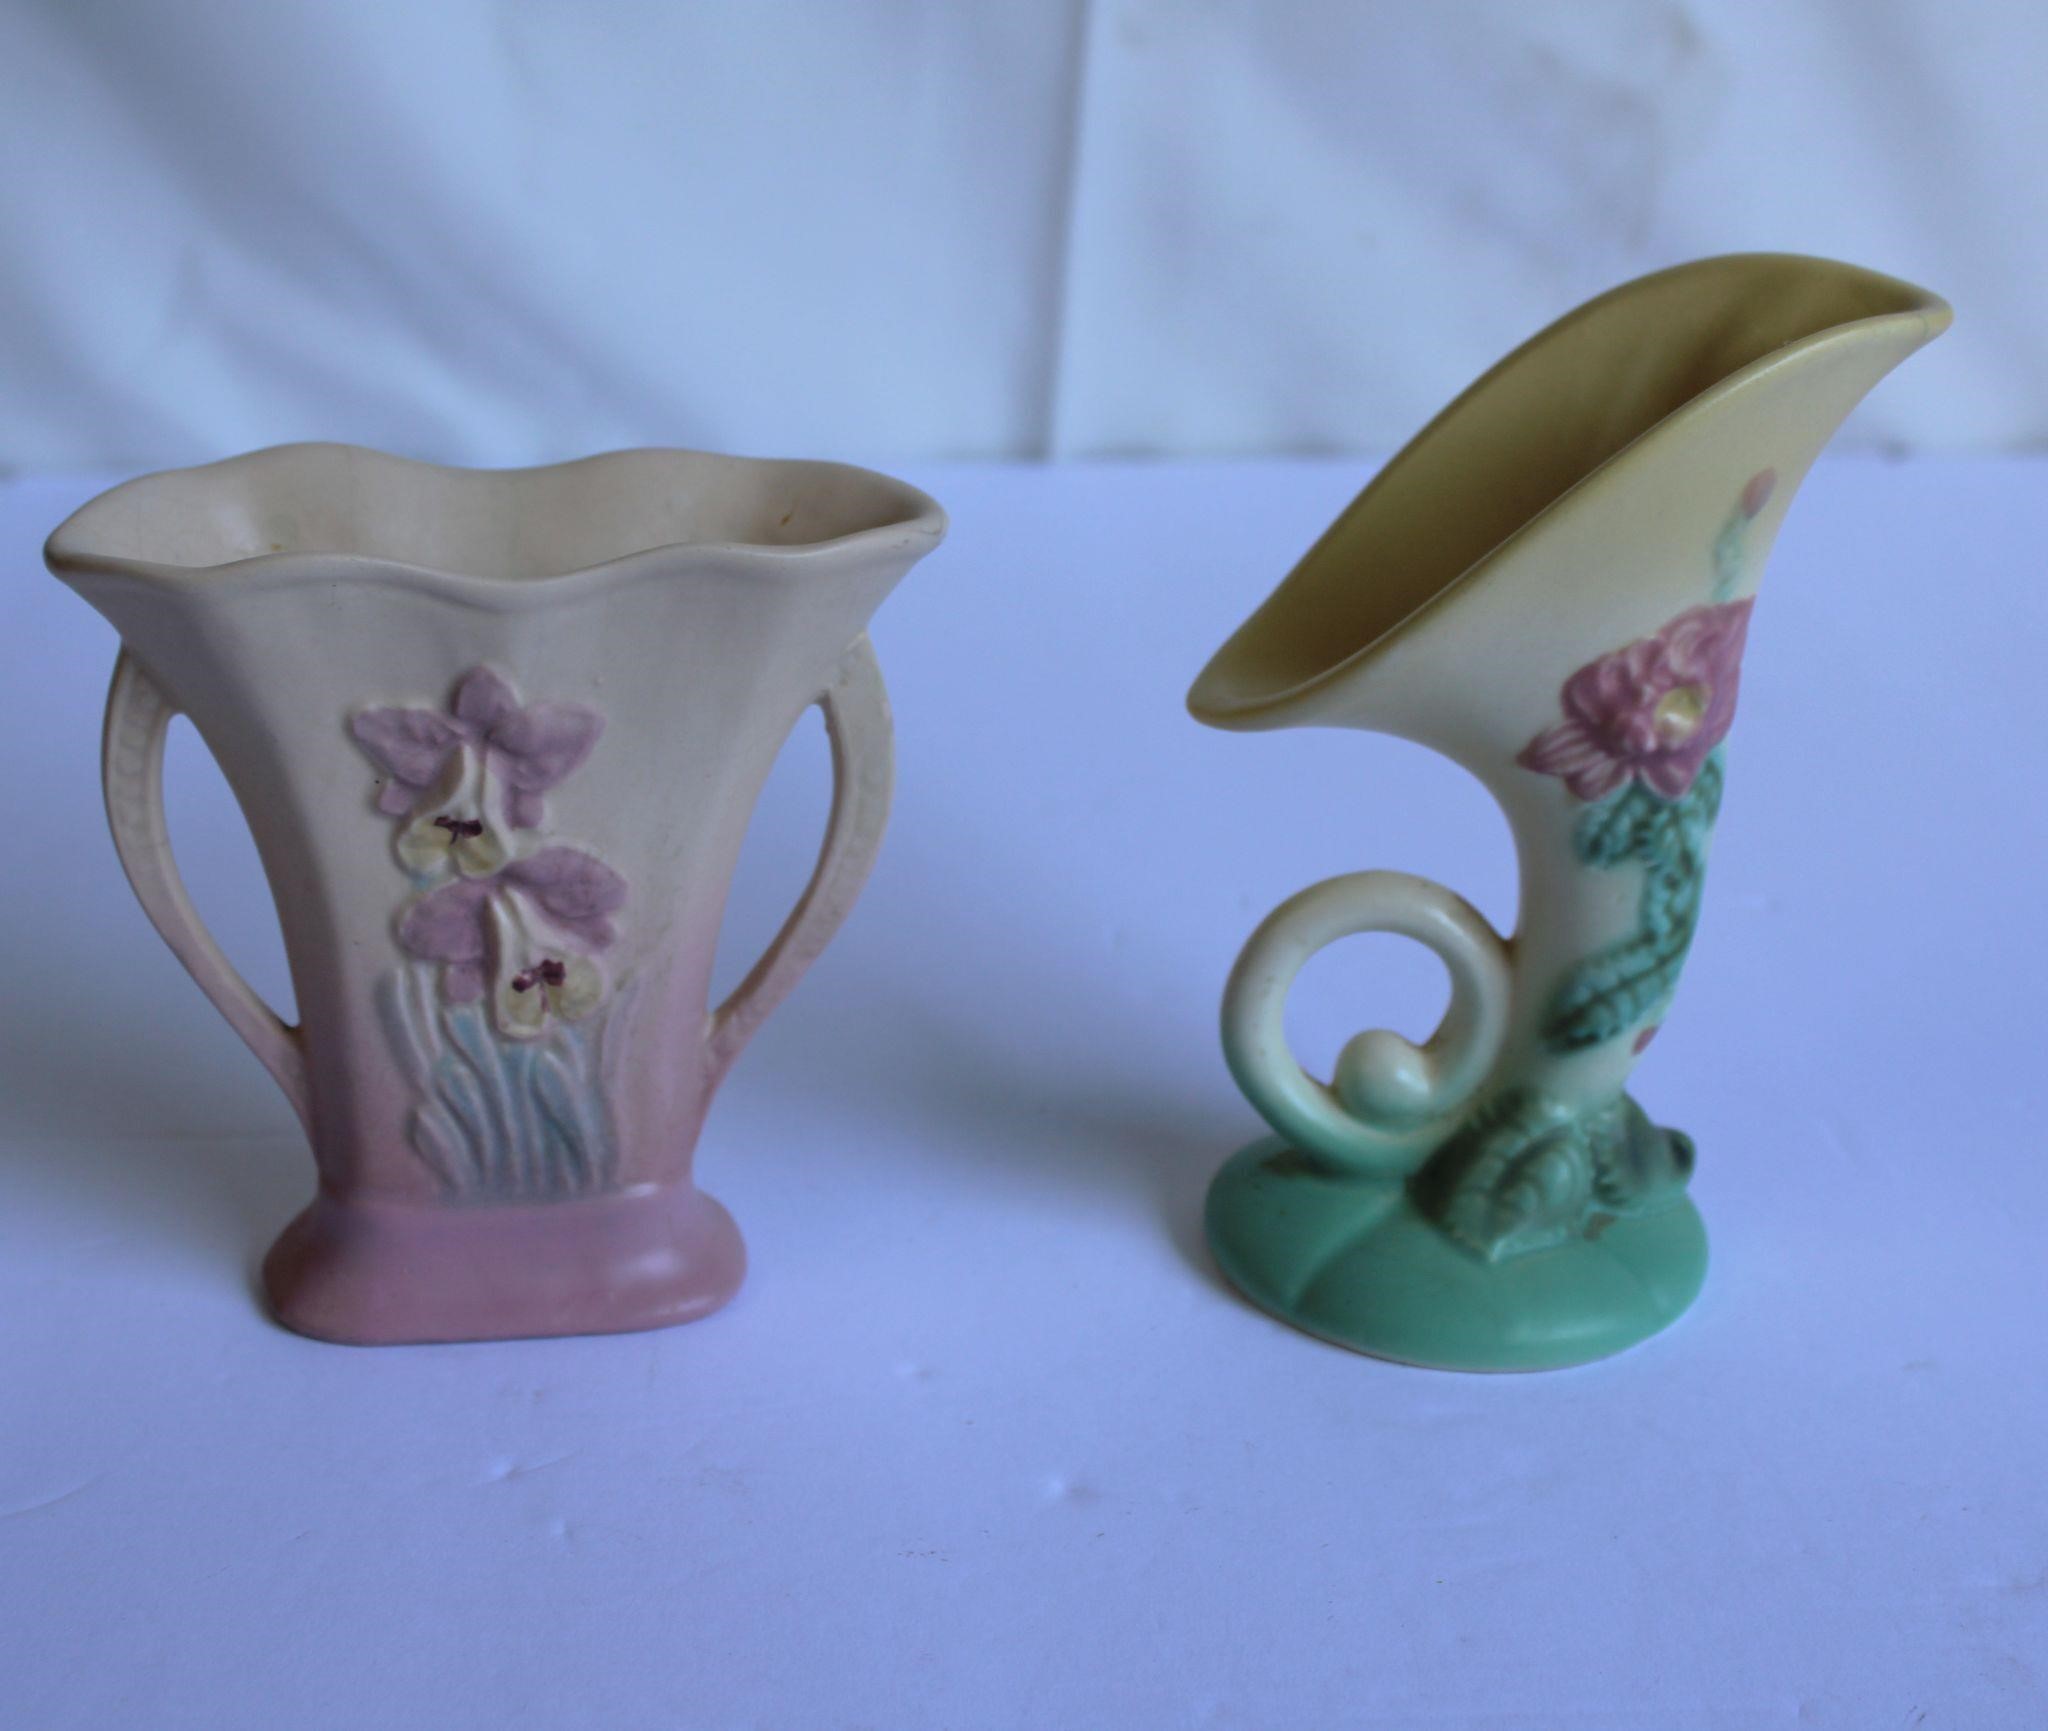 Hull Pottery Vases set of 2 6" Tall